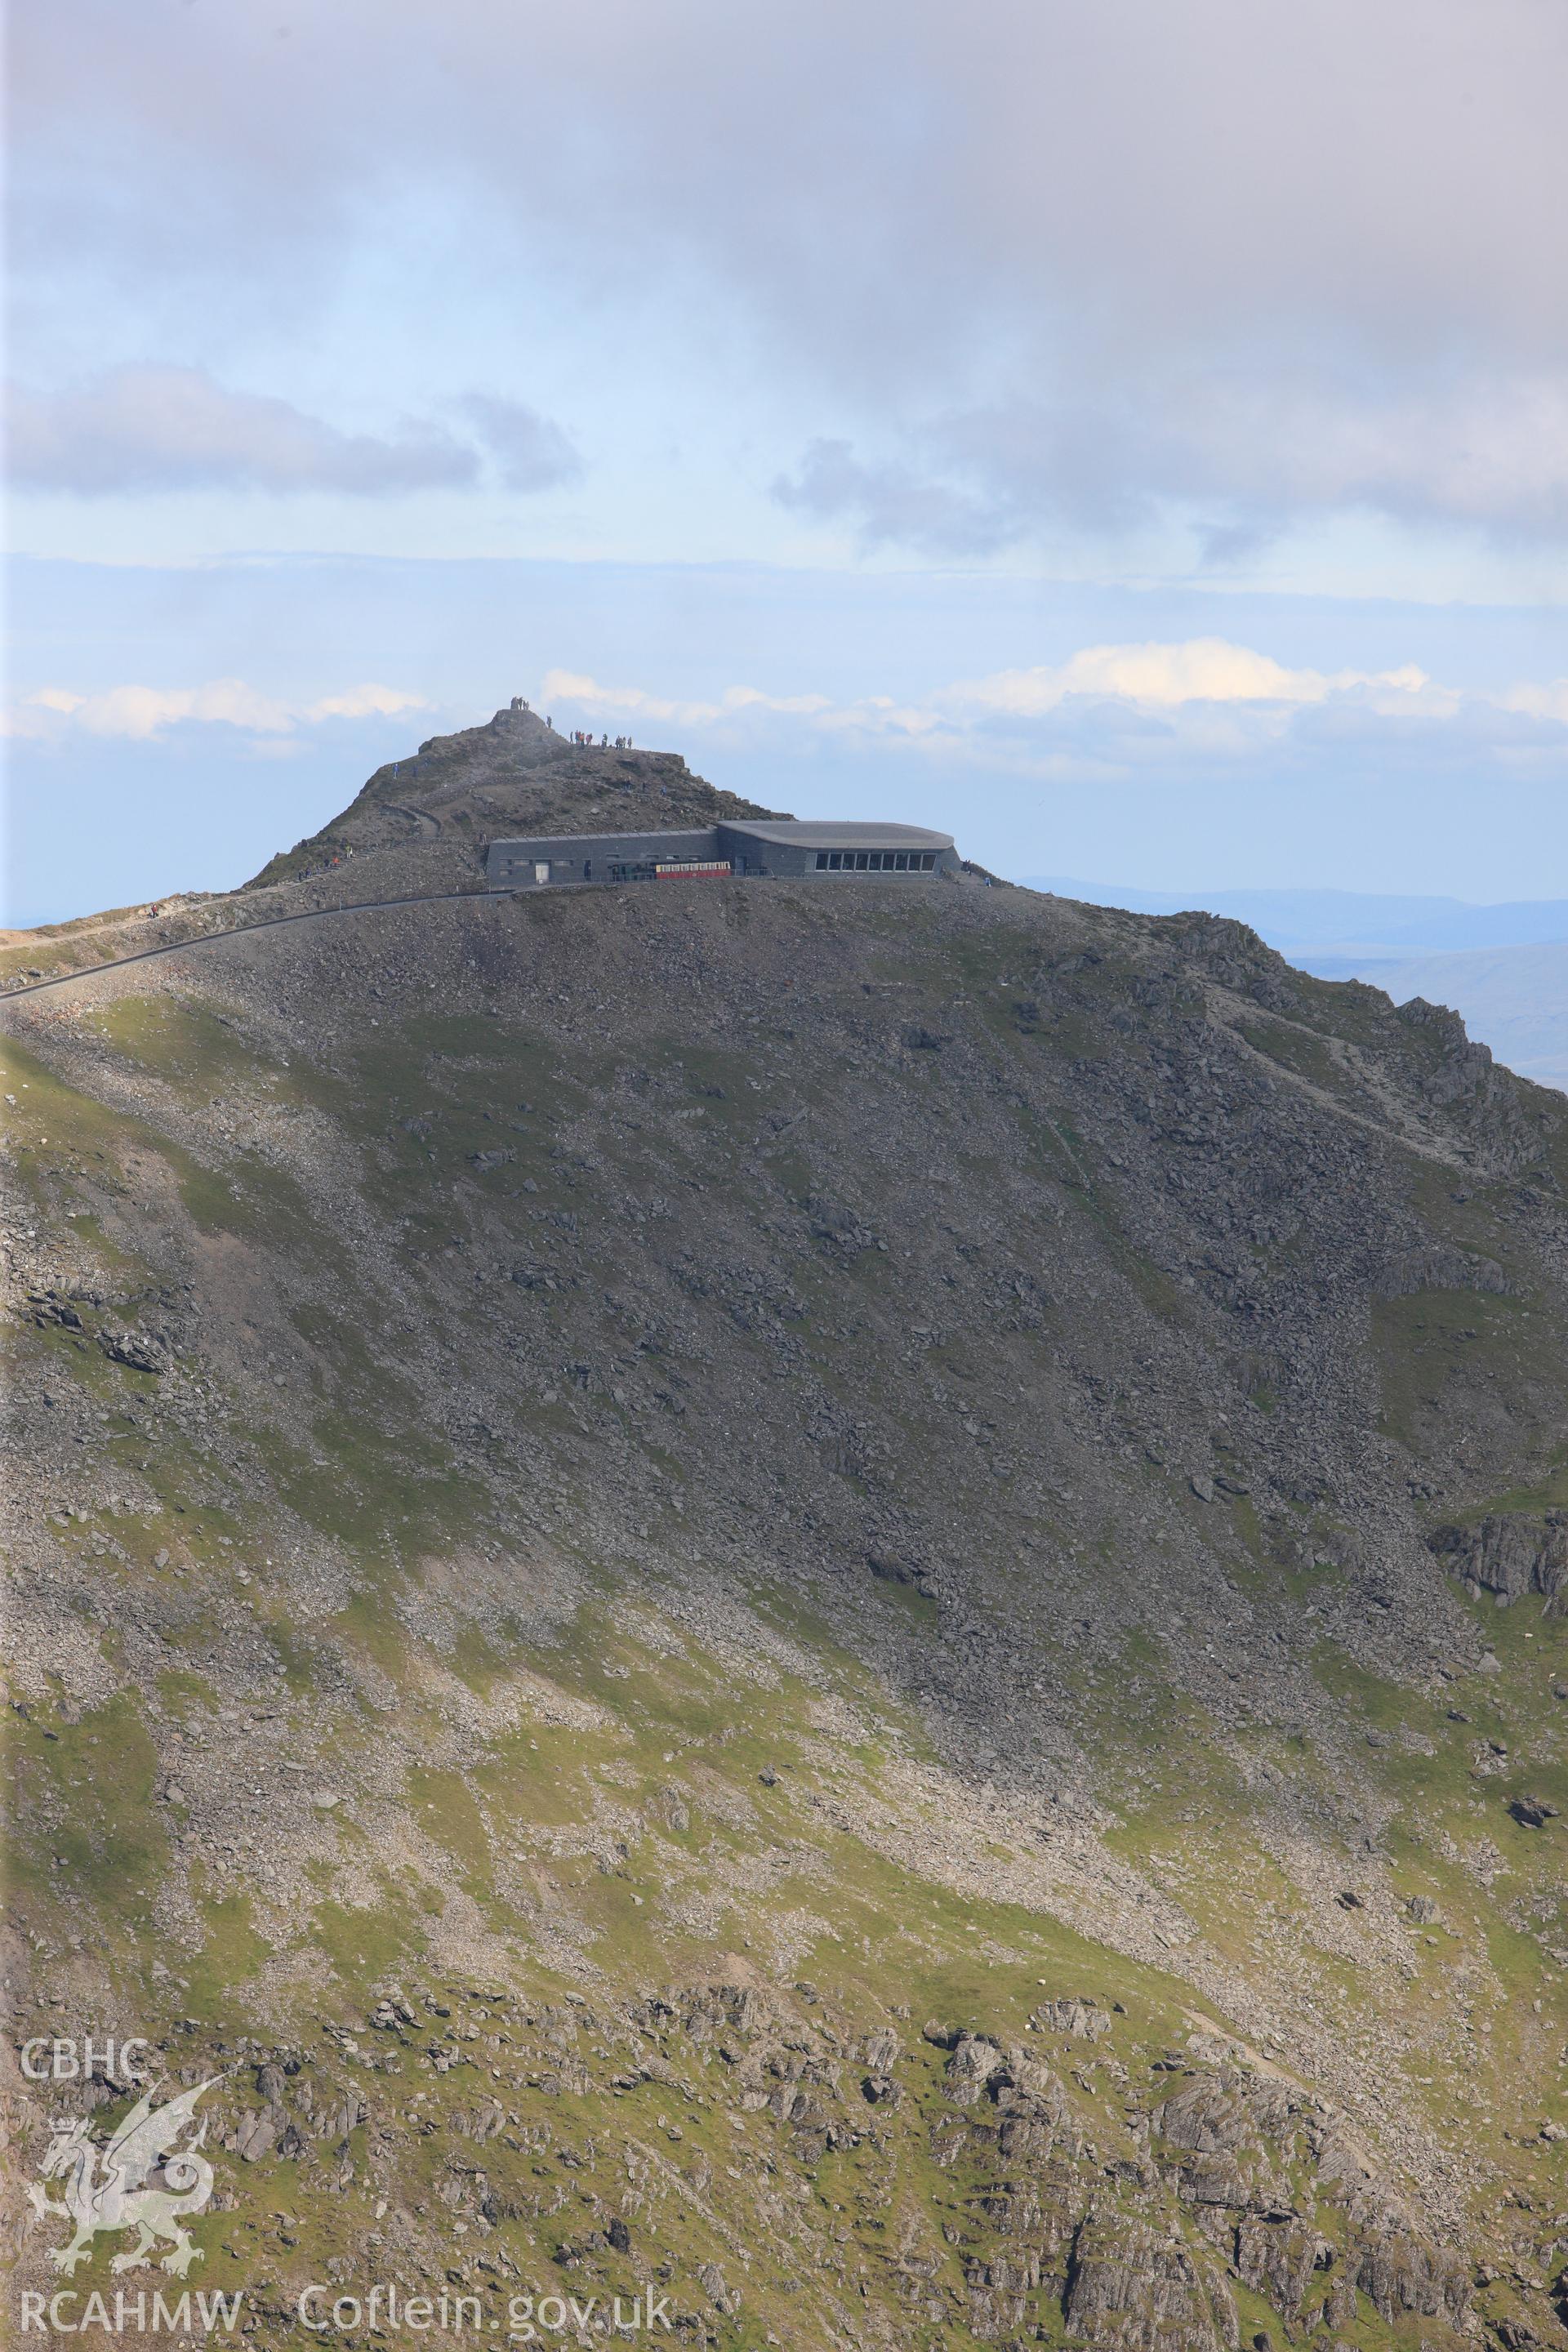 RCAHMW colour oblique photograph of Snowdon Summit Station, Image used, in 'Historic Wales from the Air' (RCAHMW 2012). Figure 179. Taken by Toby Driver on 20/07/2011.